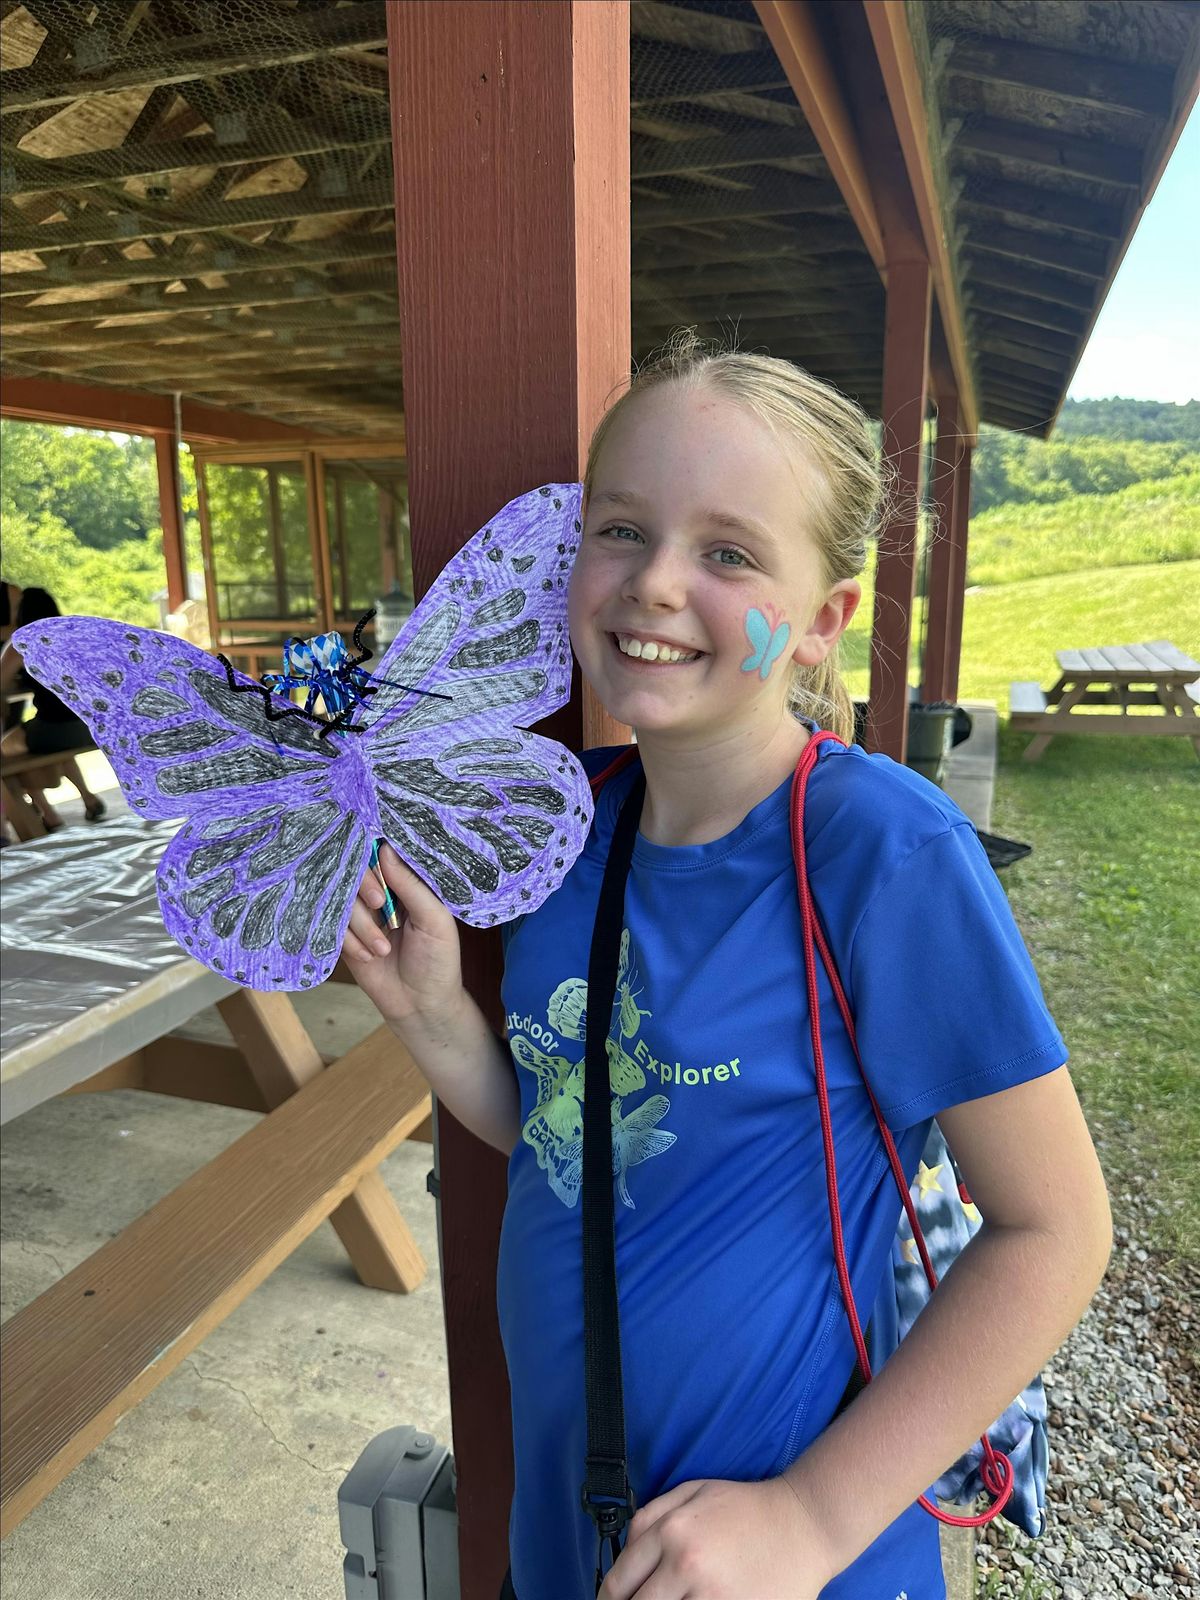 Crafting at NJC:  Butterfly Crafts at Butterfly Exhibit